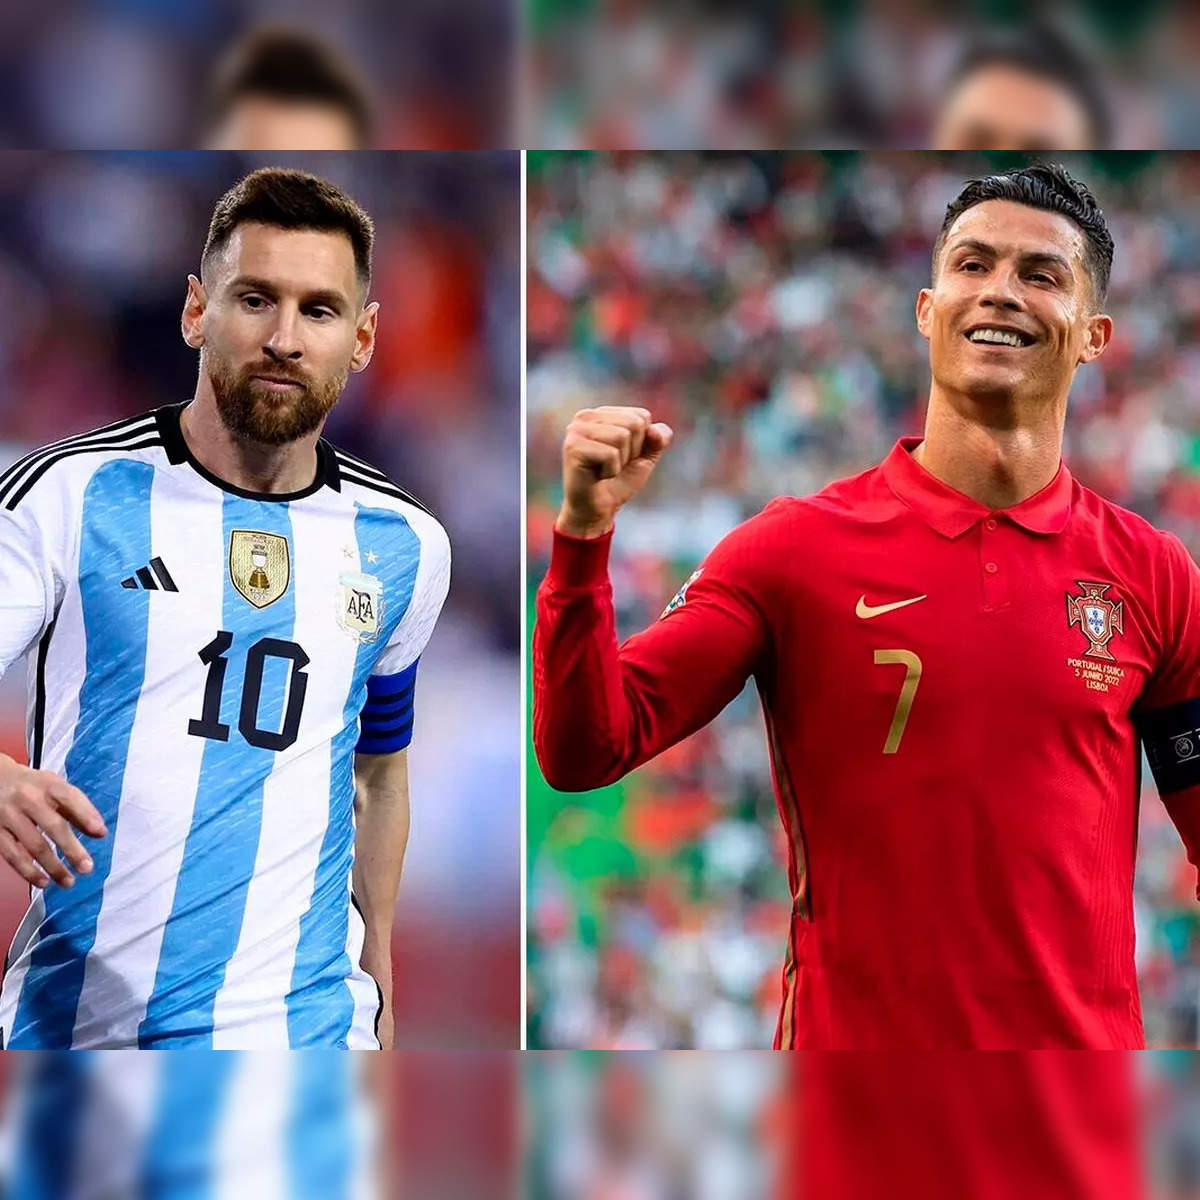 Lionel Messi, Cristiano Ronaldo and the World Cup stars with one